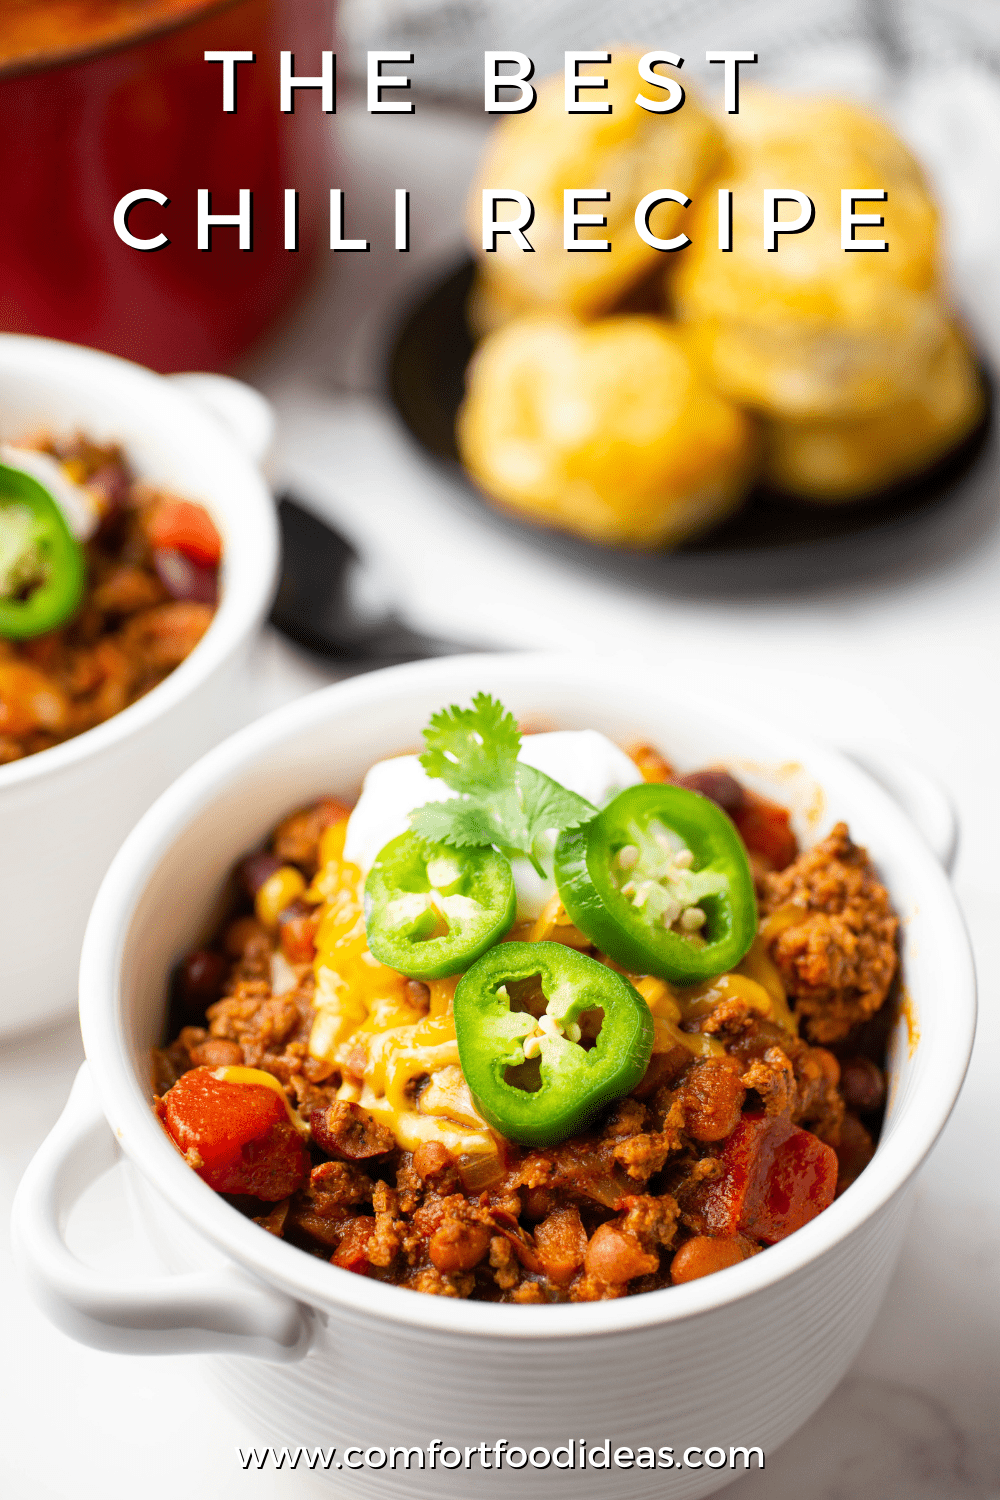 The Best Chili Recipe | Comfort Food Ideas | Cold Weather Recipe